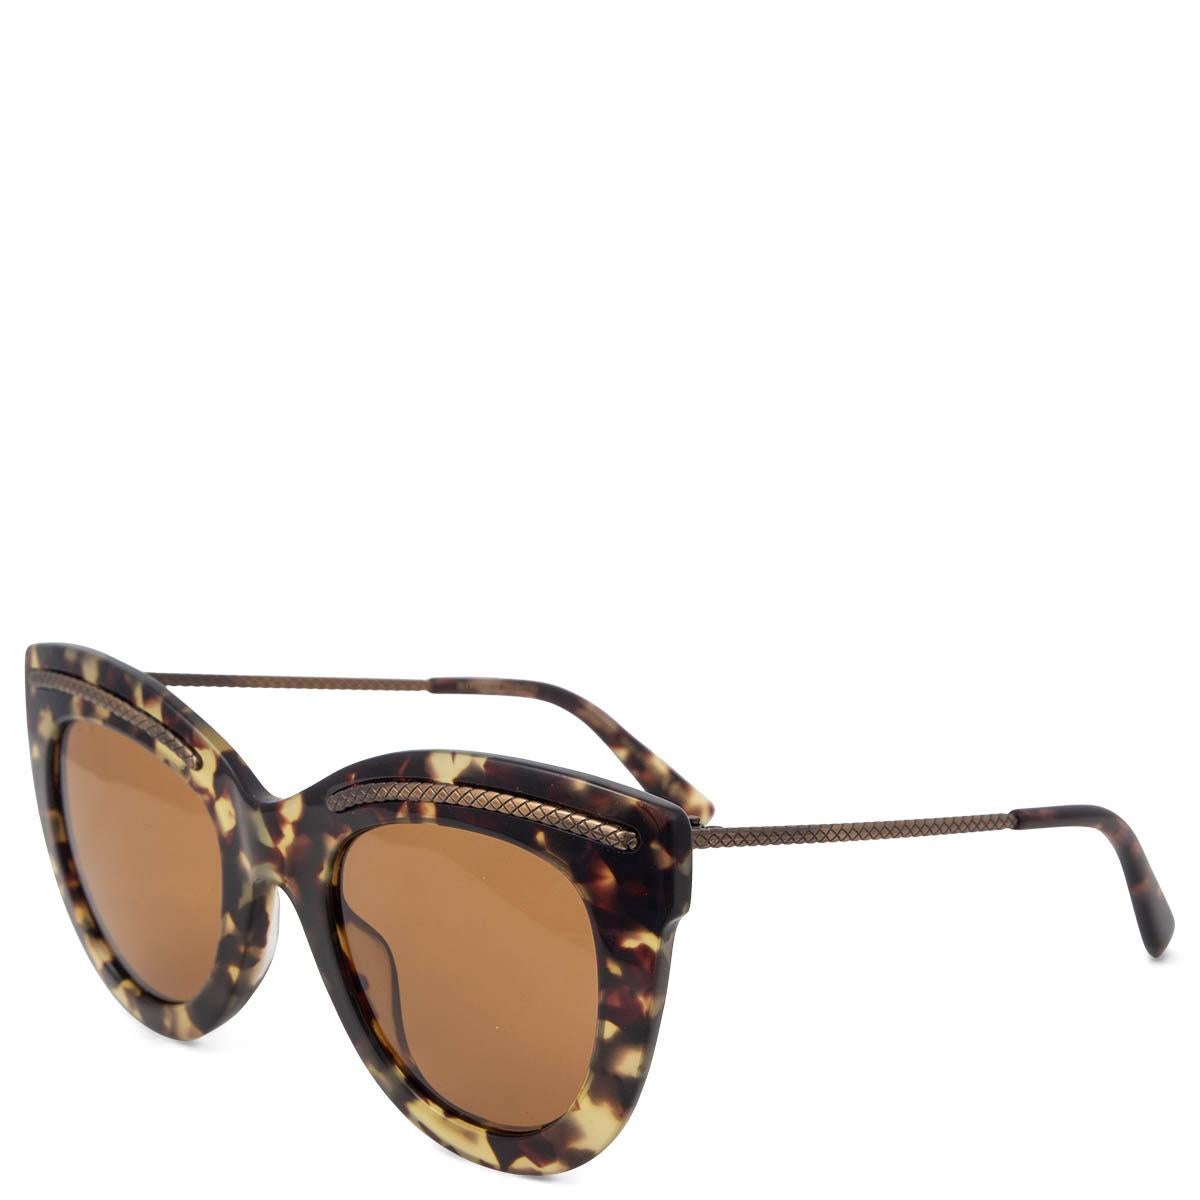 100% authentic Bottega Veneta BV0030S tortoiseshell sunglasses in dark brown and beige acetate with intrecciato metal detail at front and on the temples. Have been worn and are in excellent condition. Come with case.